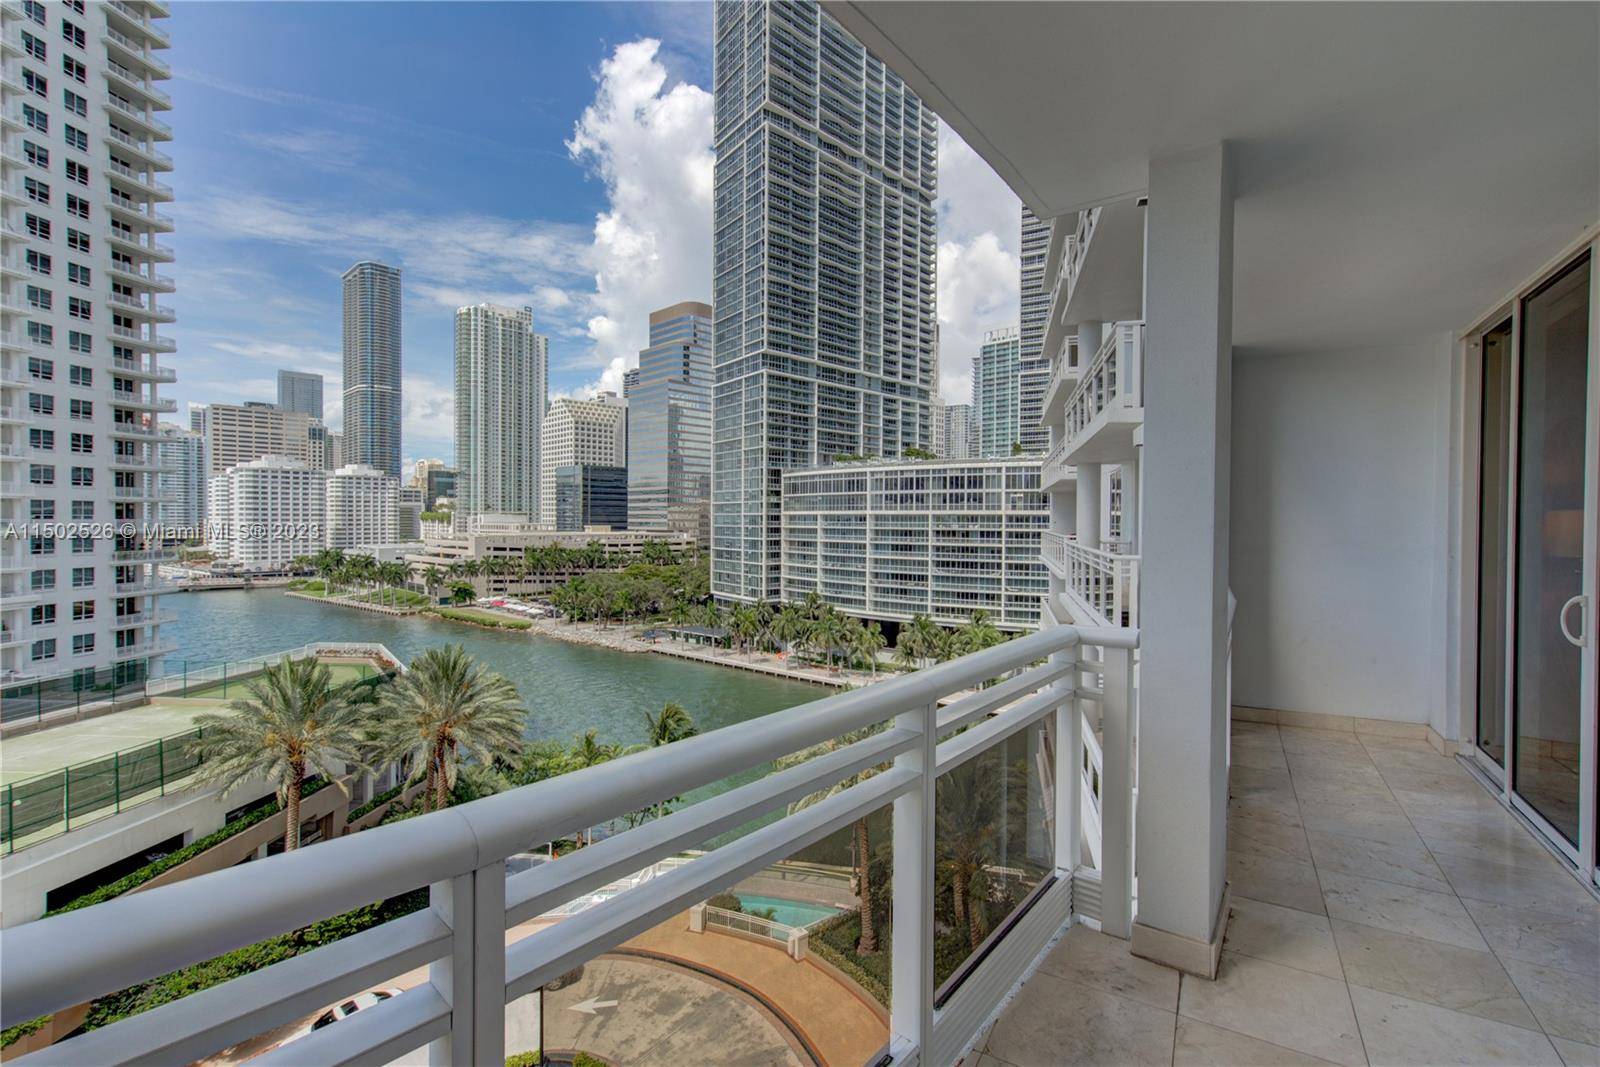 Beautiful large 1 bedroom unit in the desired Carbonell condo with gorgeous water and city views.